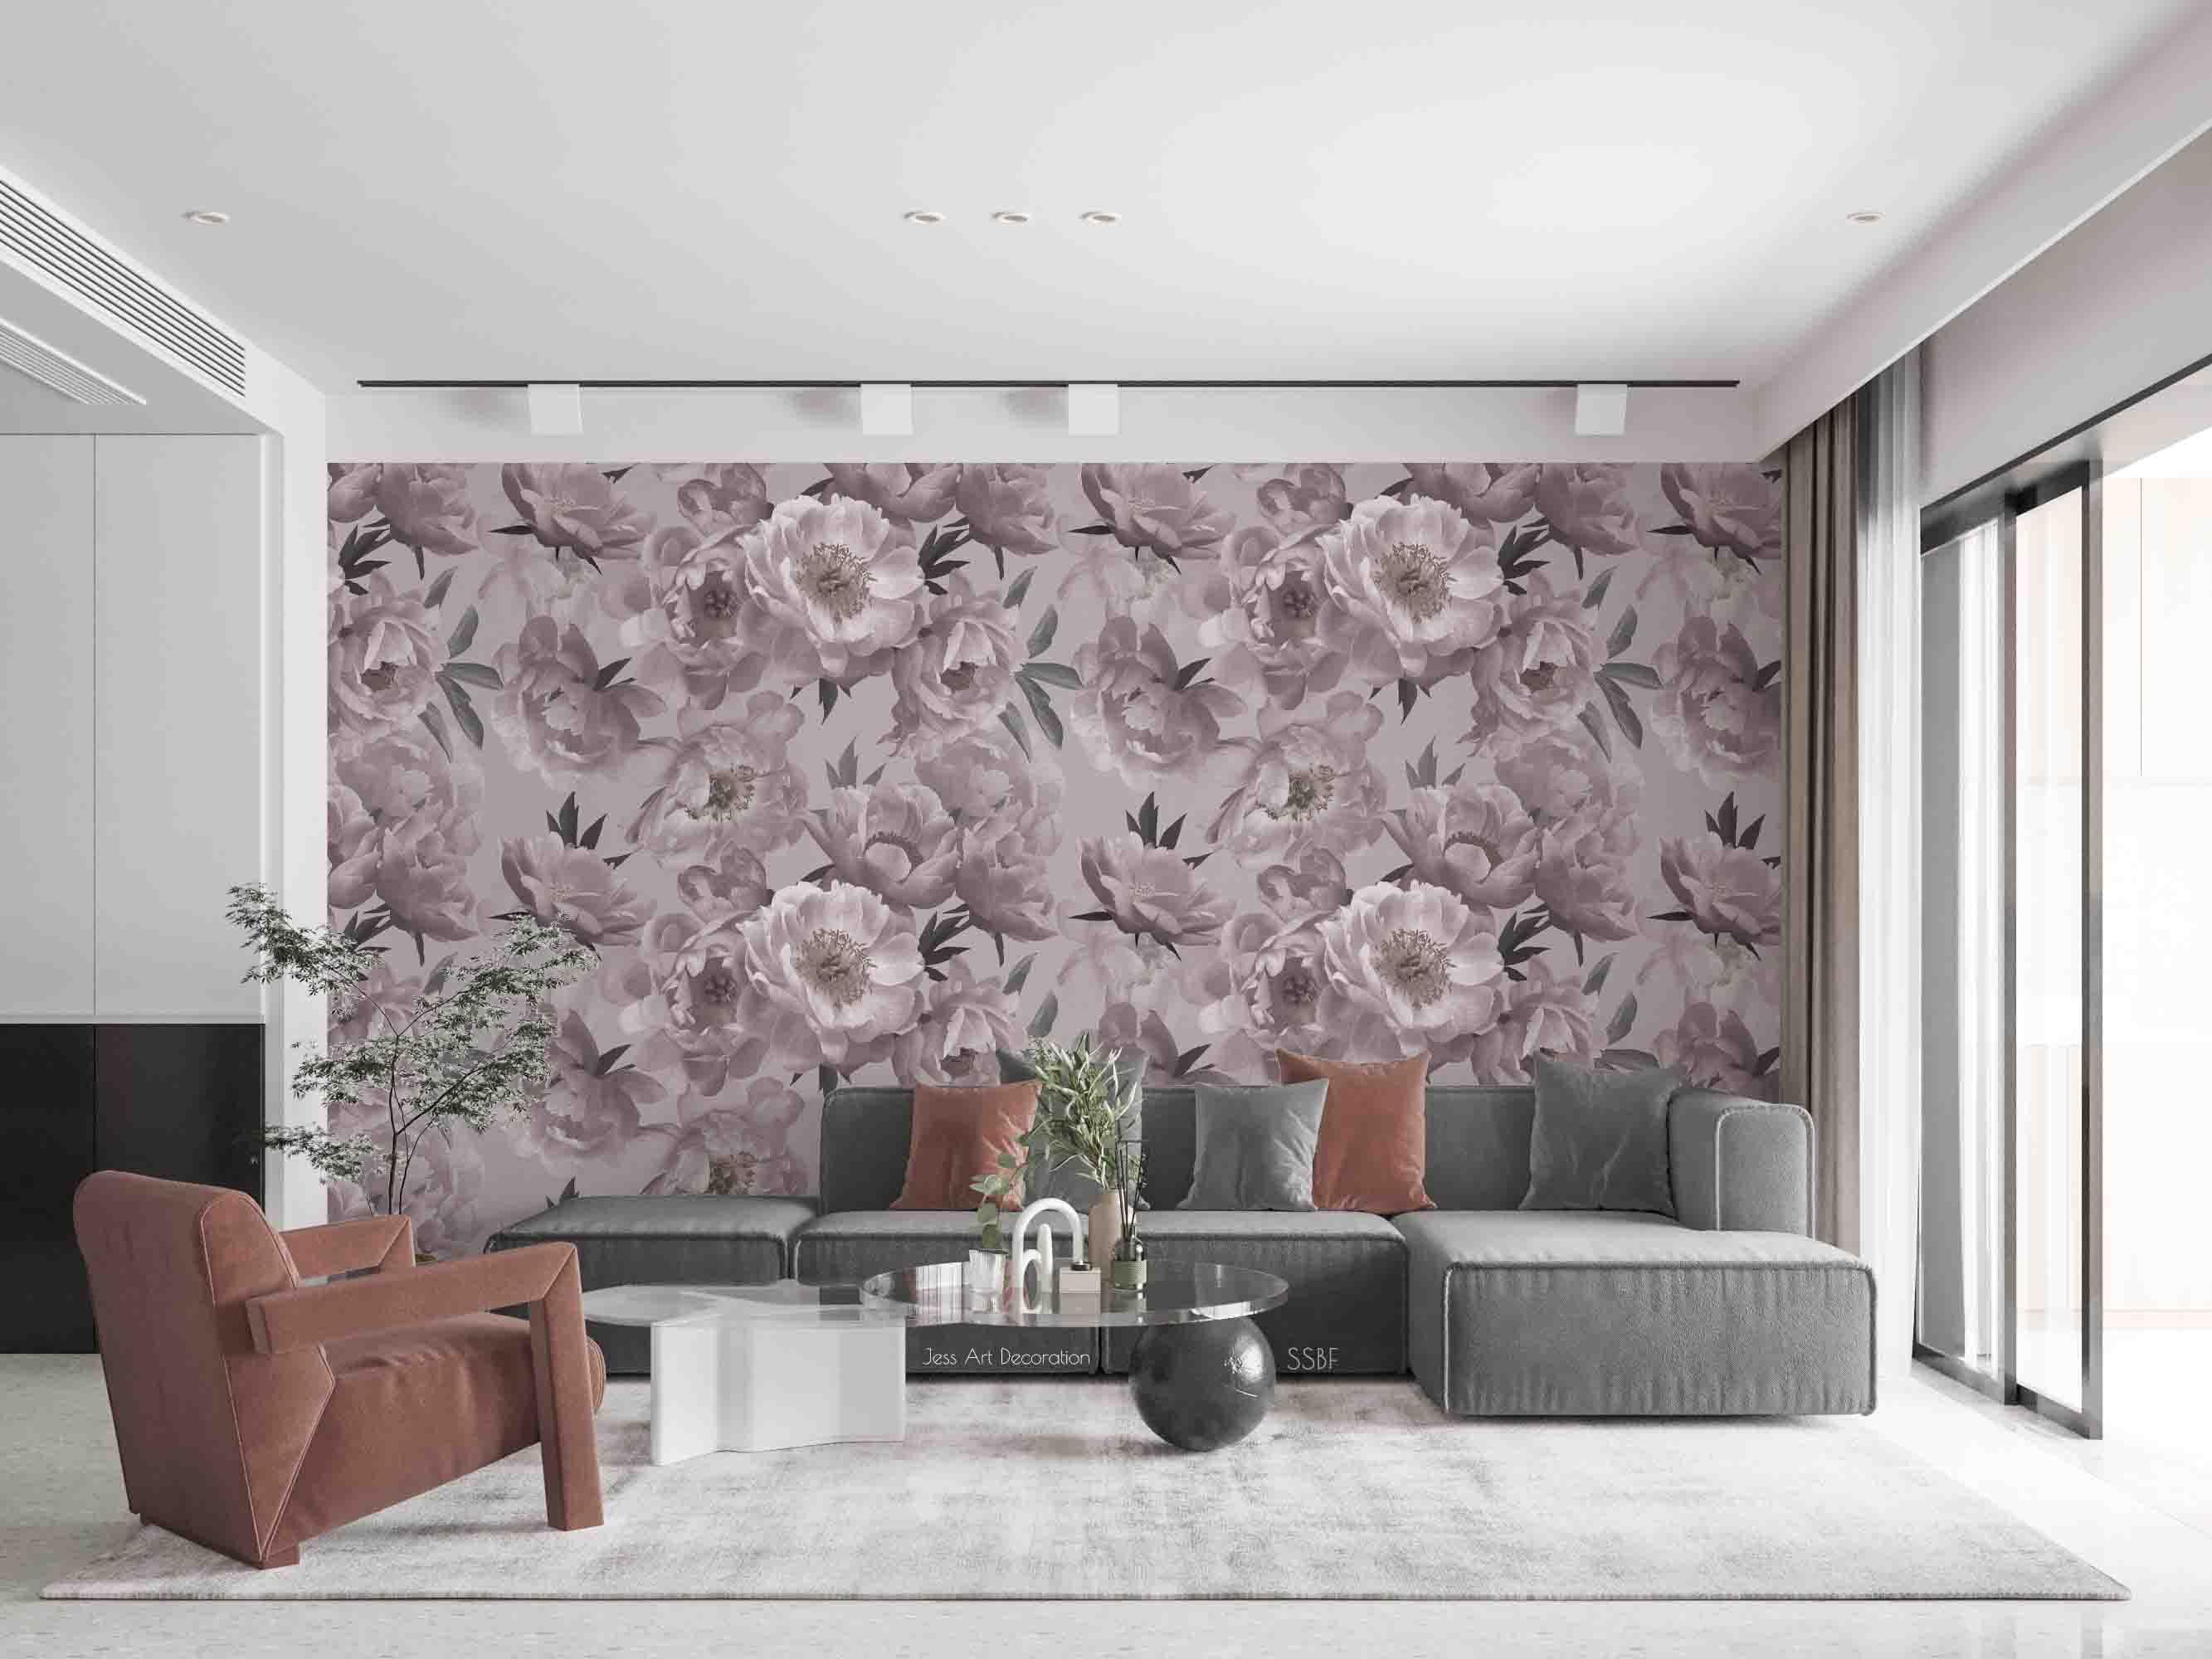 3D Vintage Watercolor Baroque Art Blooming Lilac Peony Background Wall Mural Wallpaper GD 3577- Jess Art Decoration